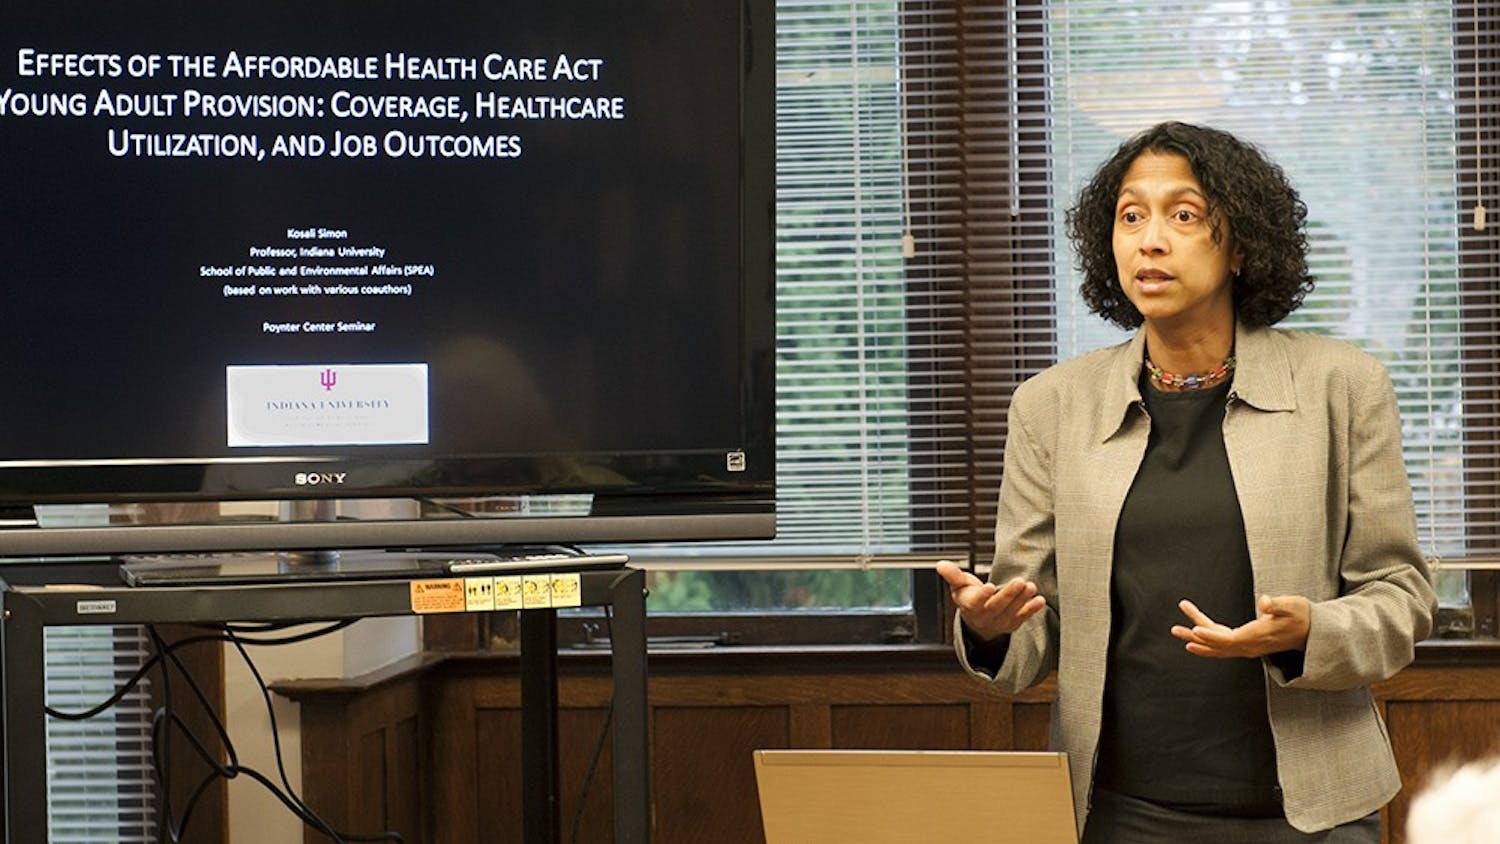 Kosali Simon, Professor of Public and Environmental Affairs, speaks at the Poynter Center on Wednesday. The talk addressed how the Affordable Care Act affects young adults.